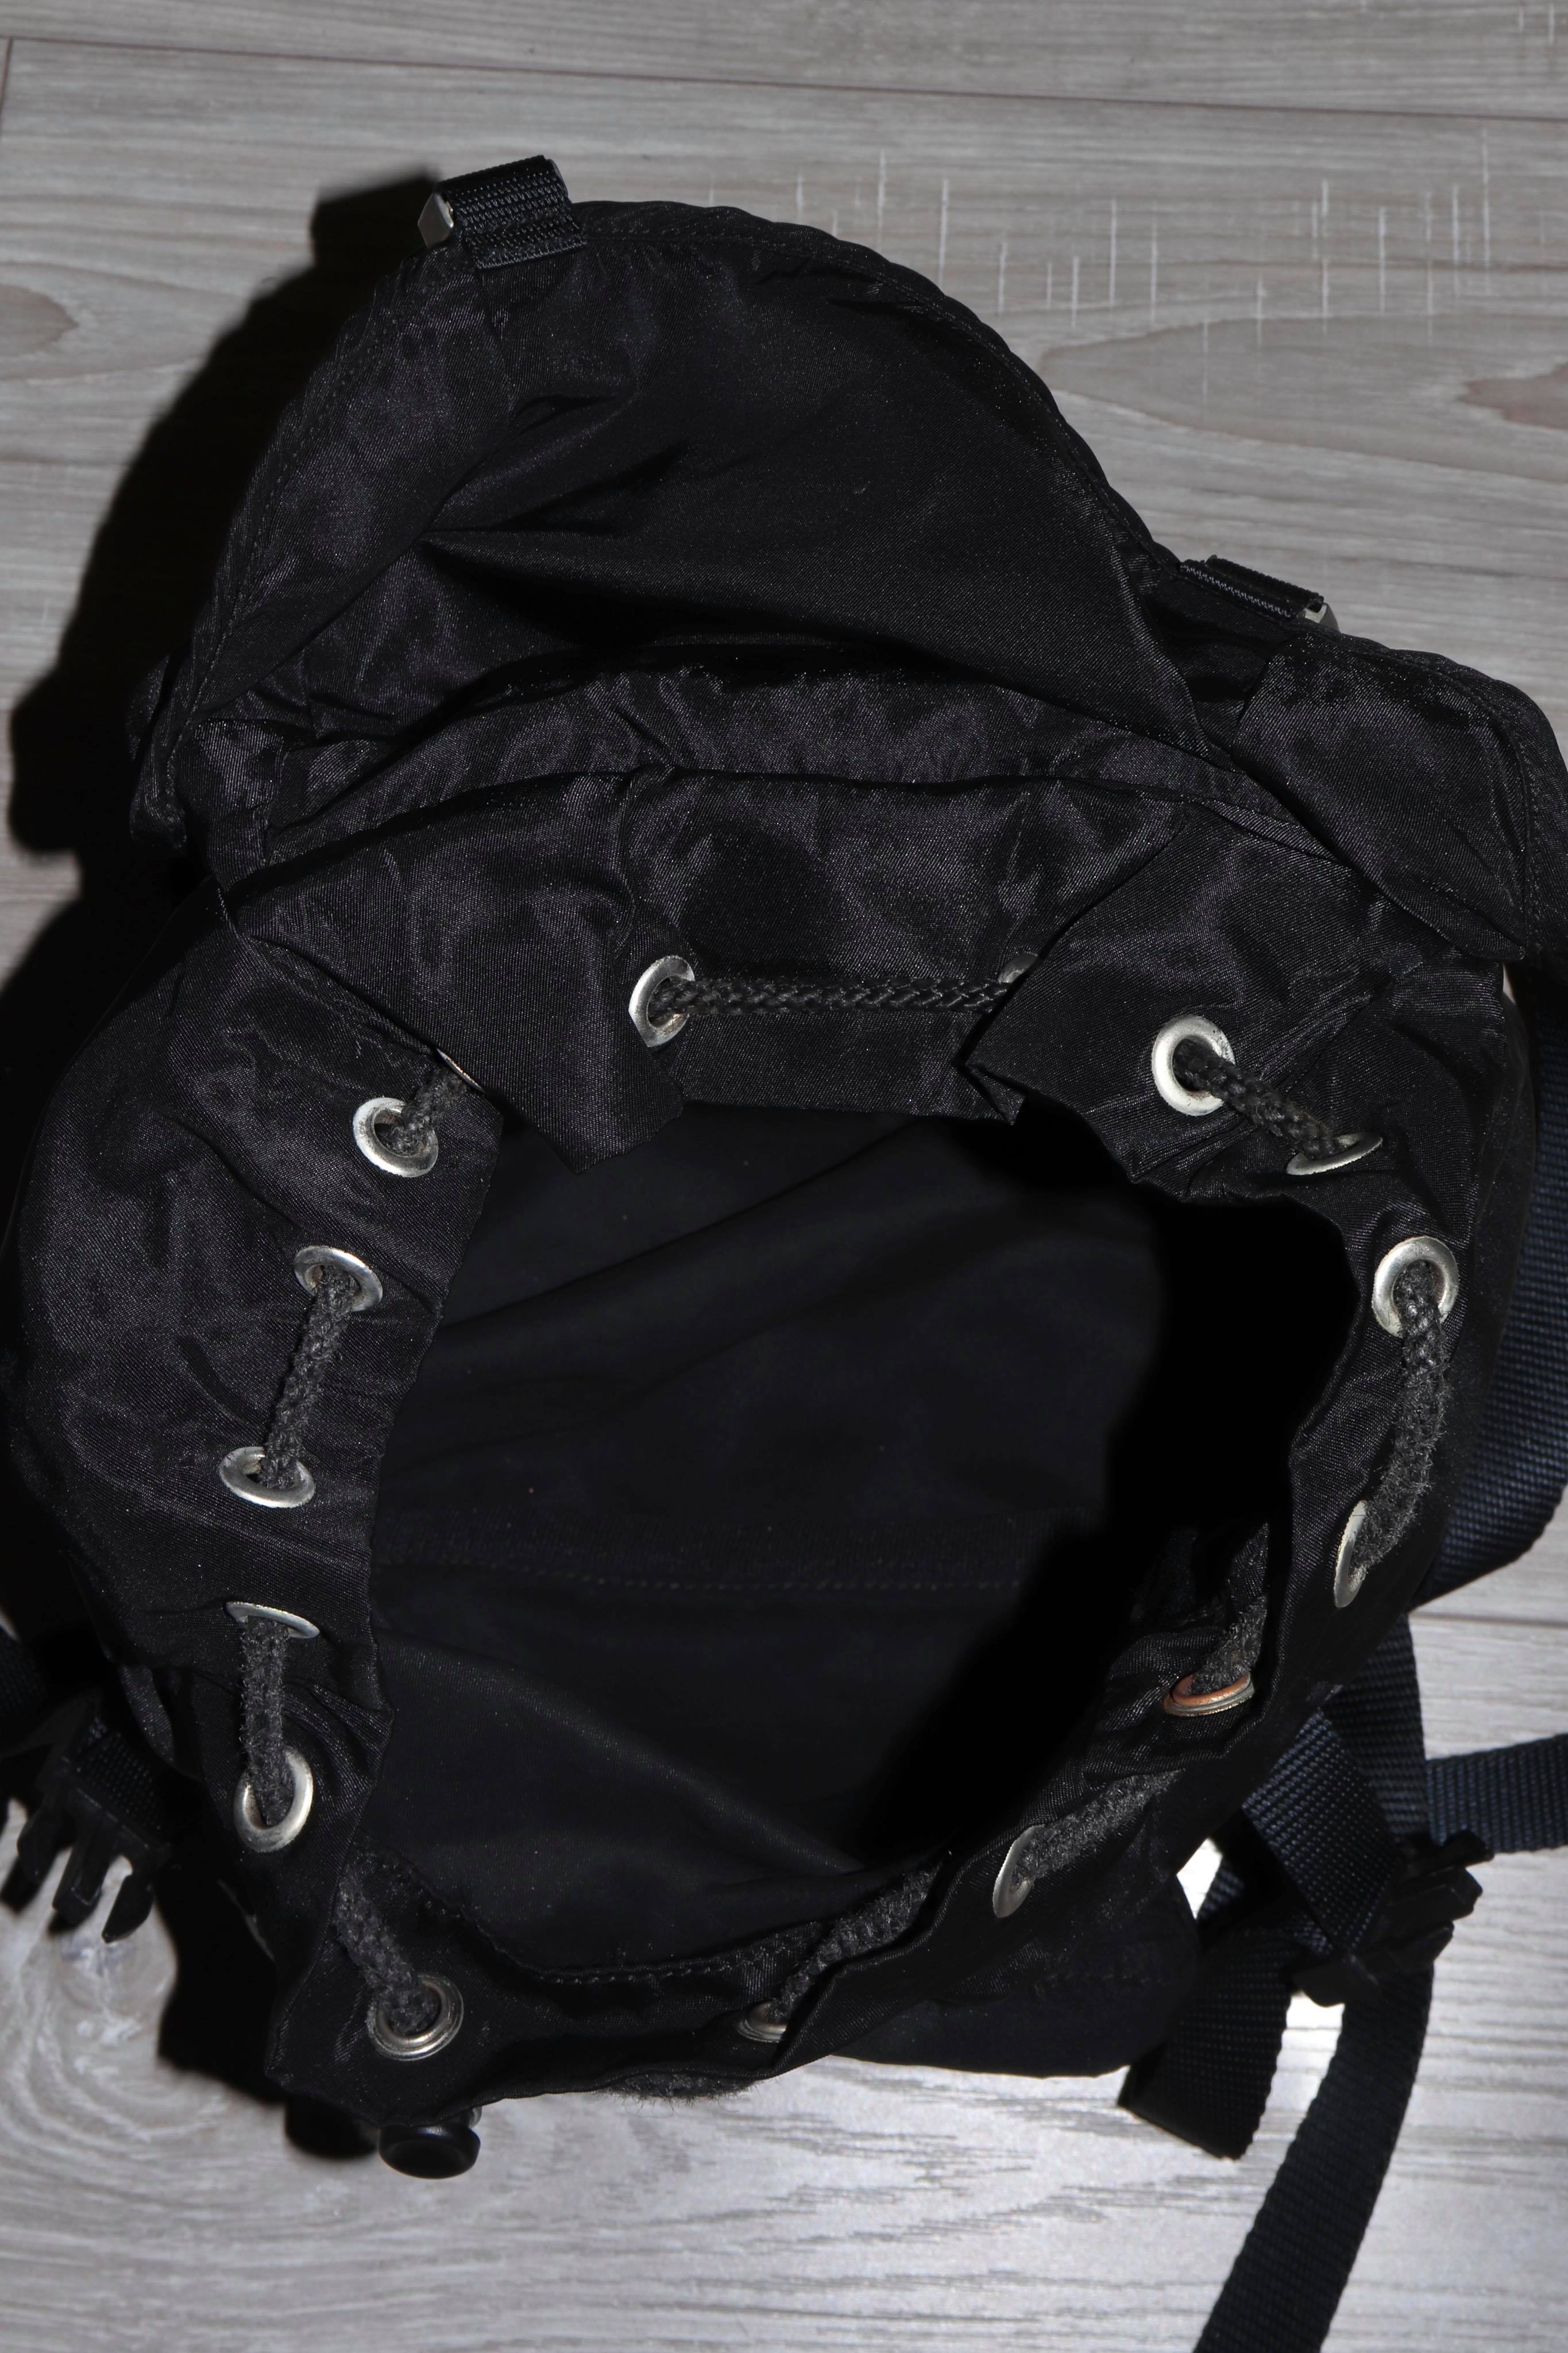 Prada Nylon Backpack with Buckle Details